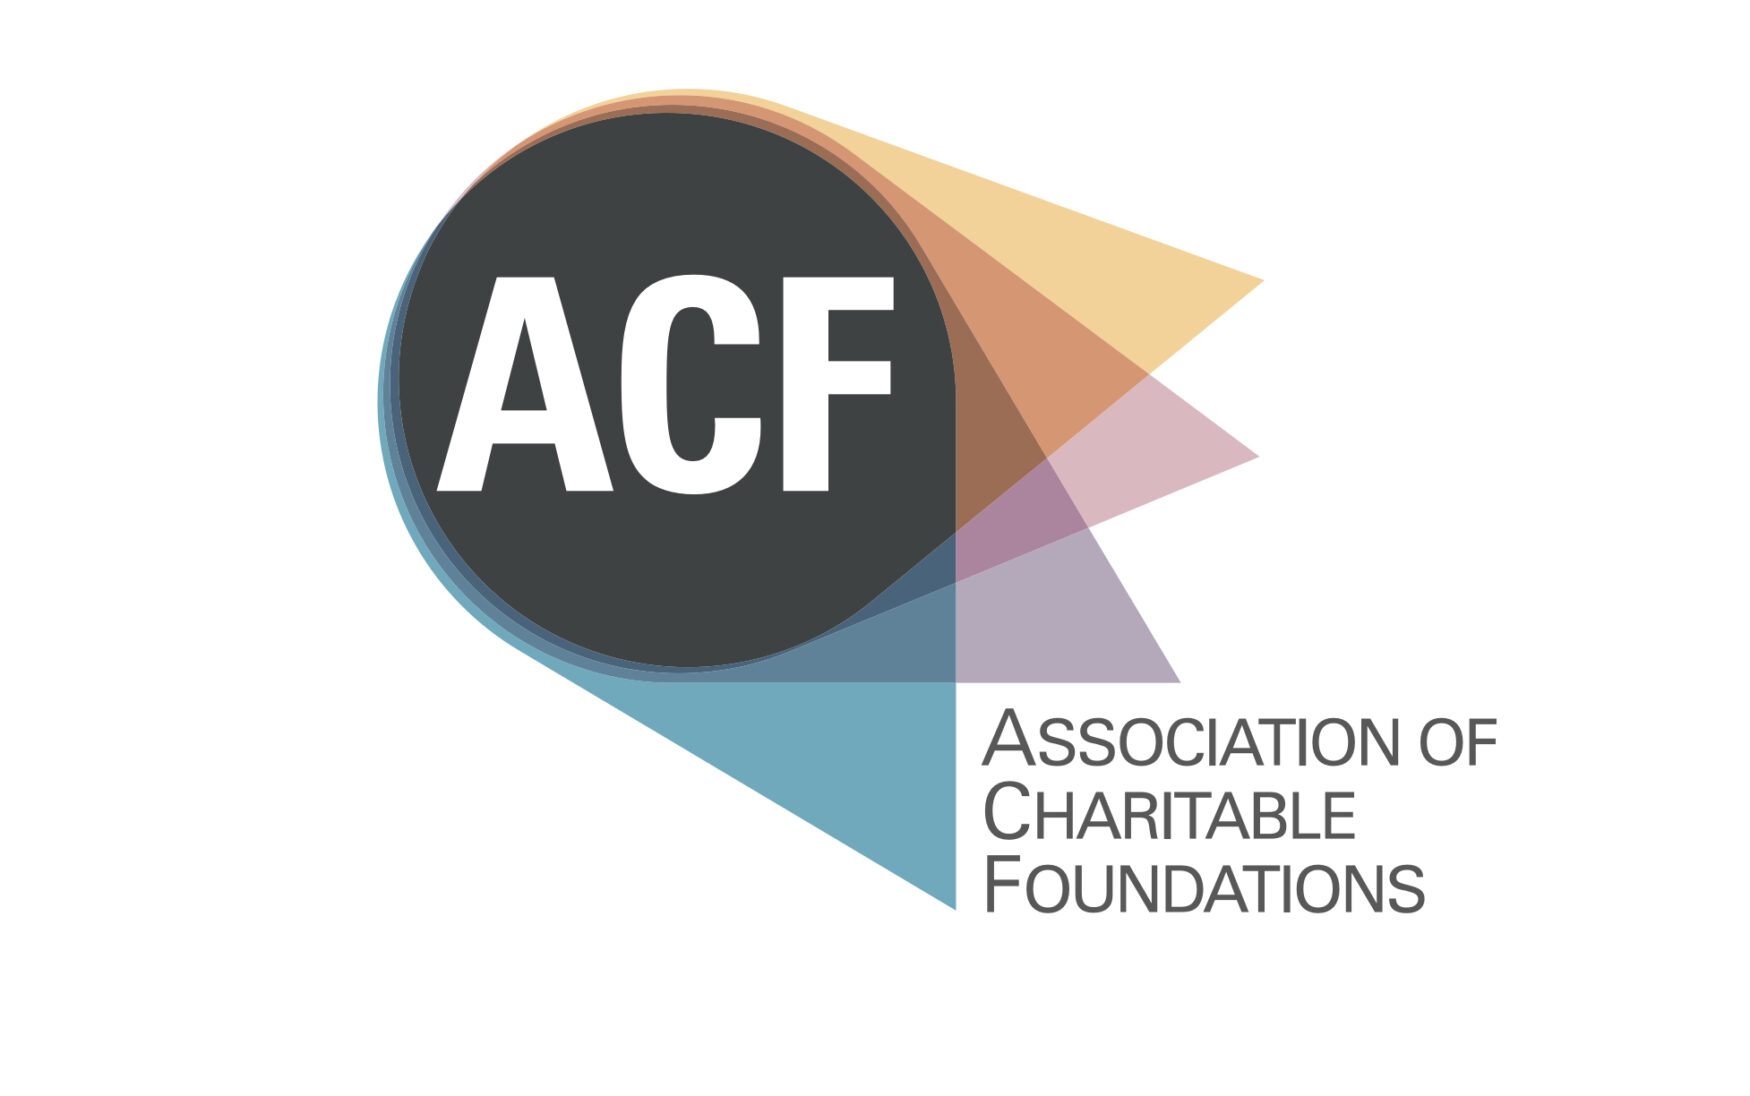 The Association of Charitable Foundations' logo